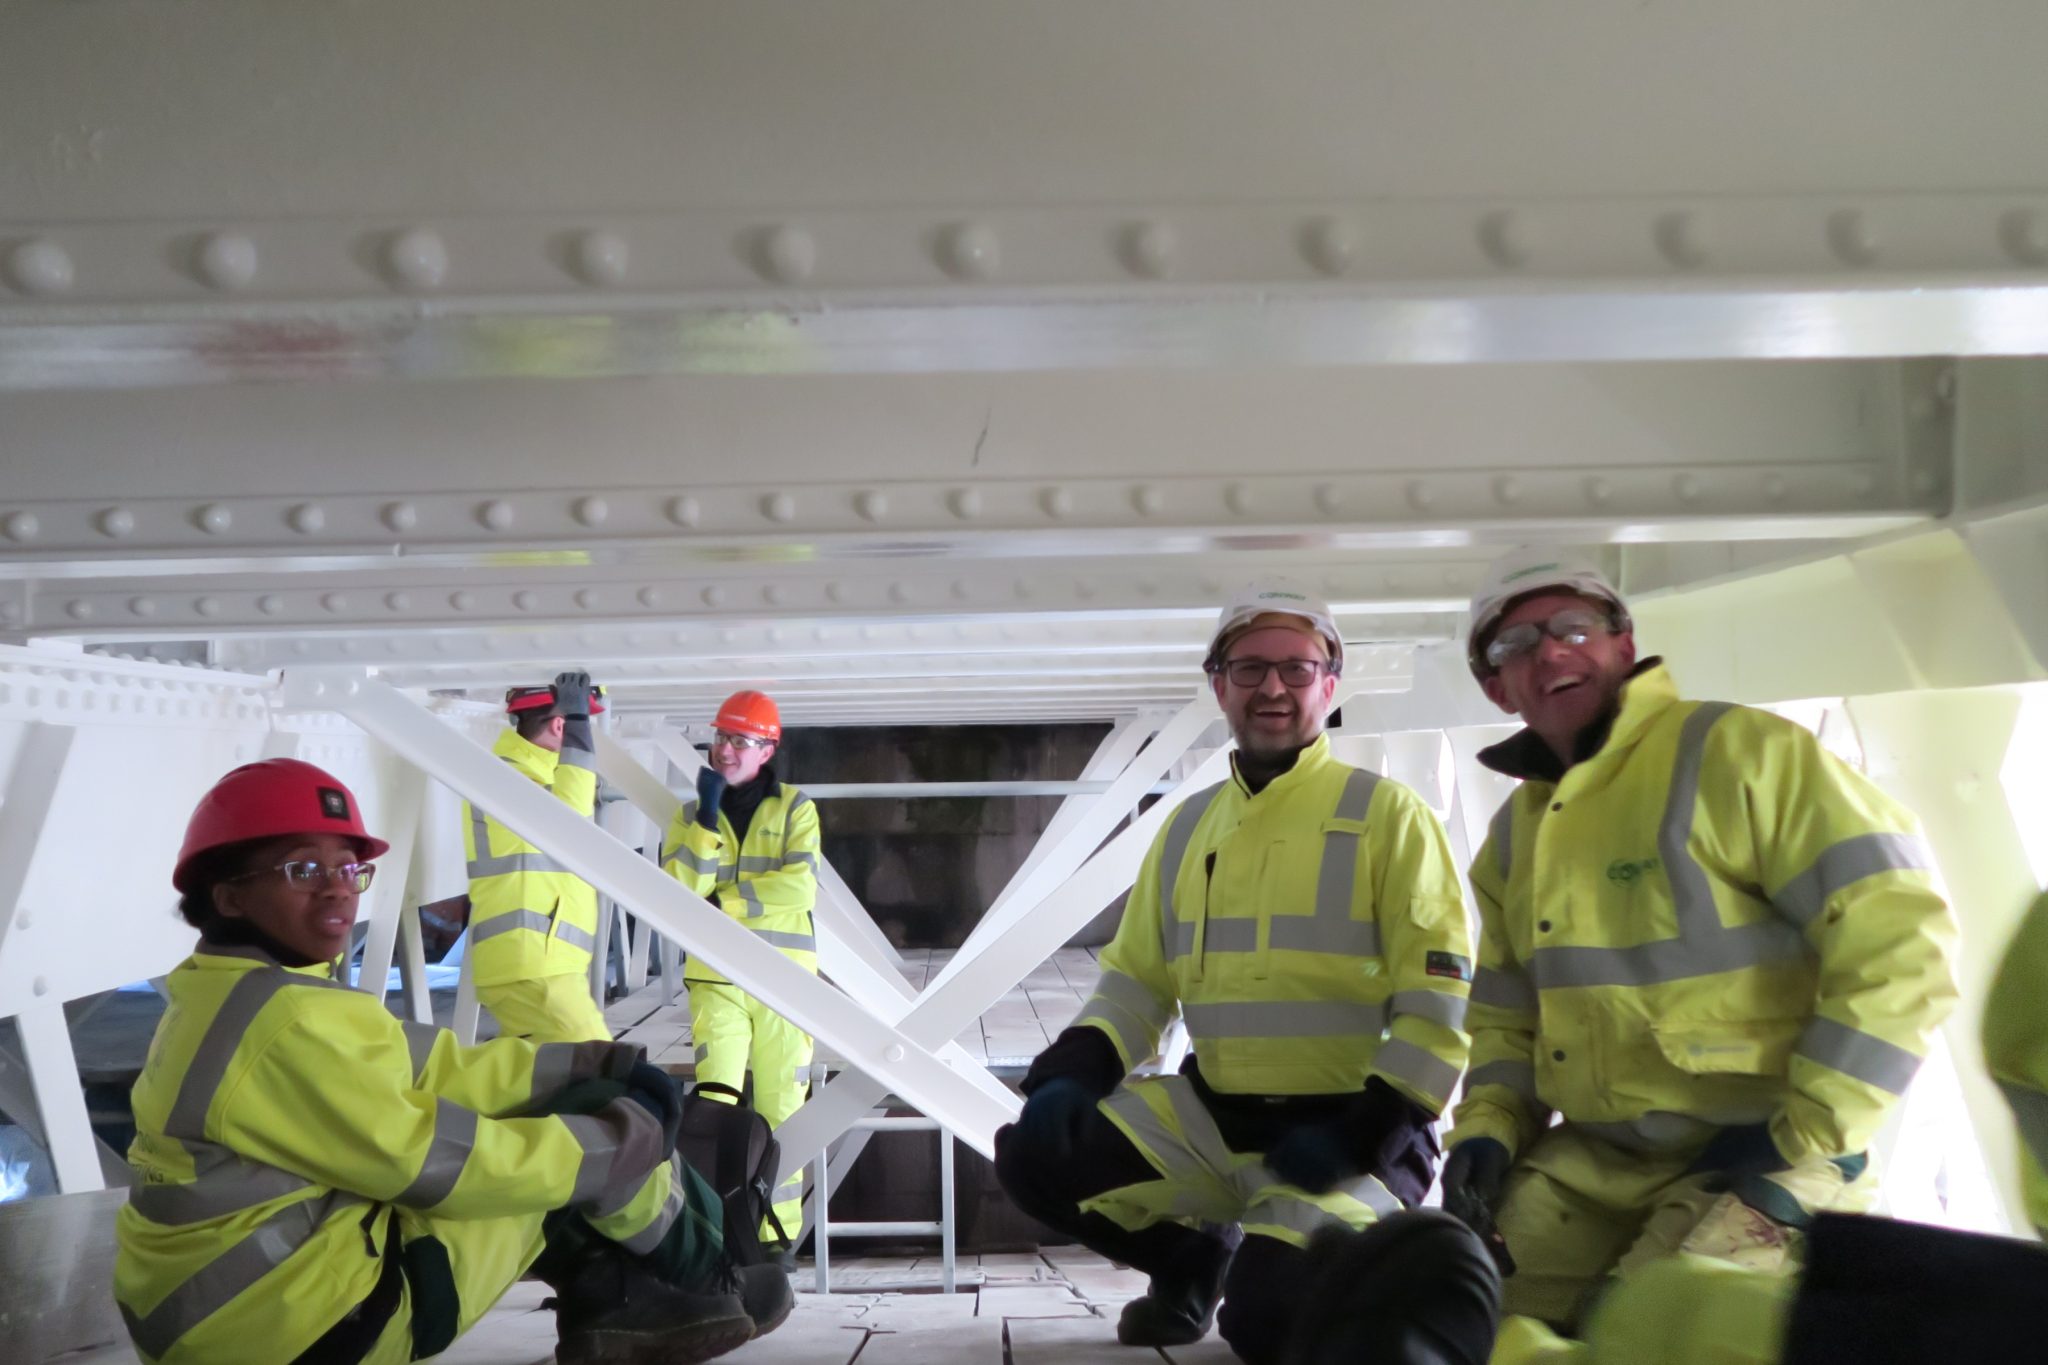 Five people wearing bright yellow personal protection equipment and helmets explore a cramped environment of white girders and metalwork.